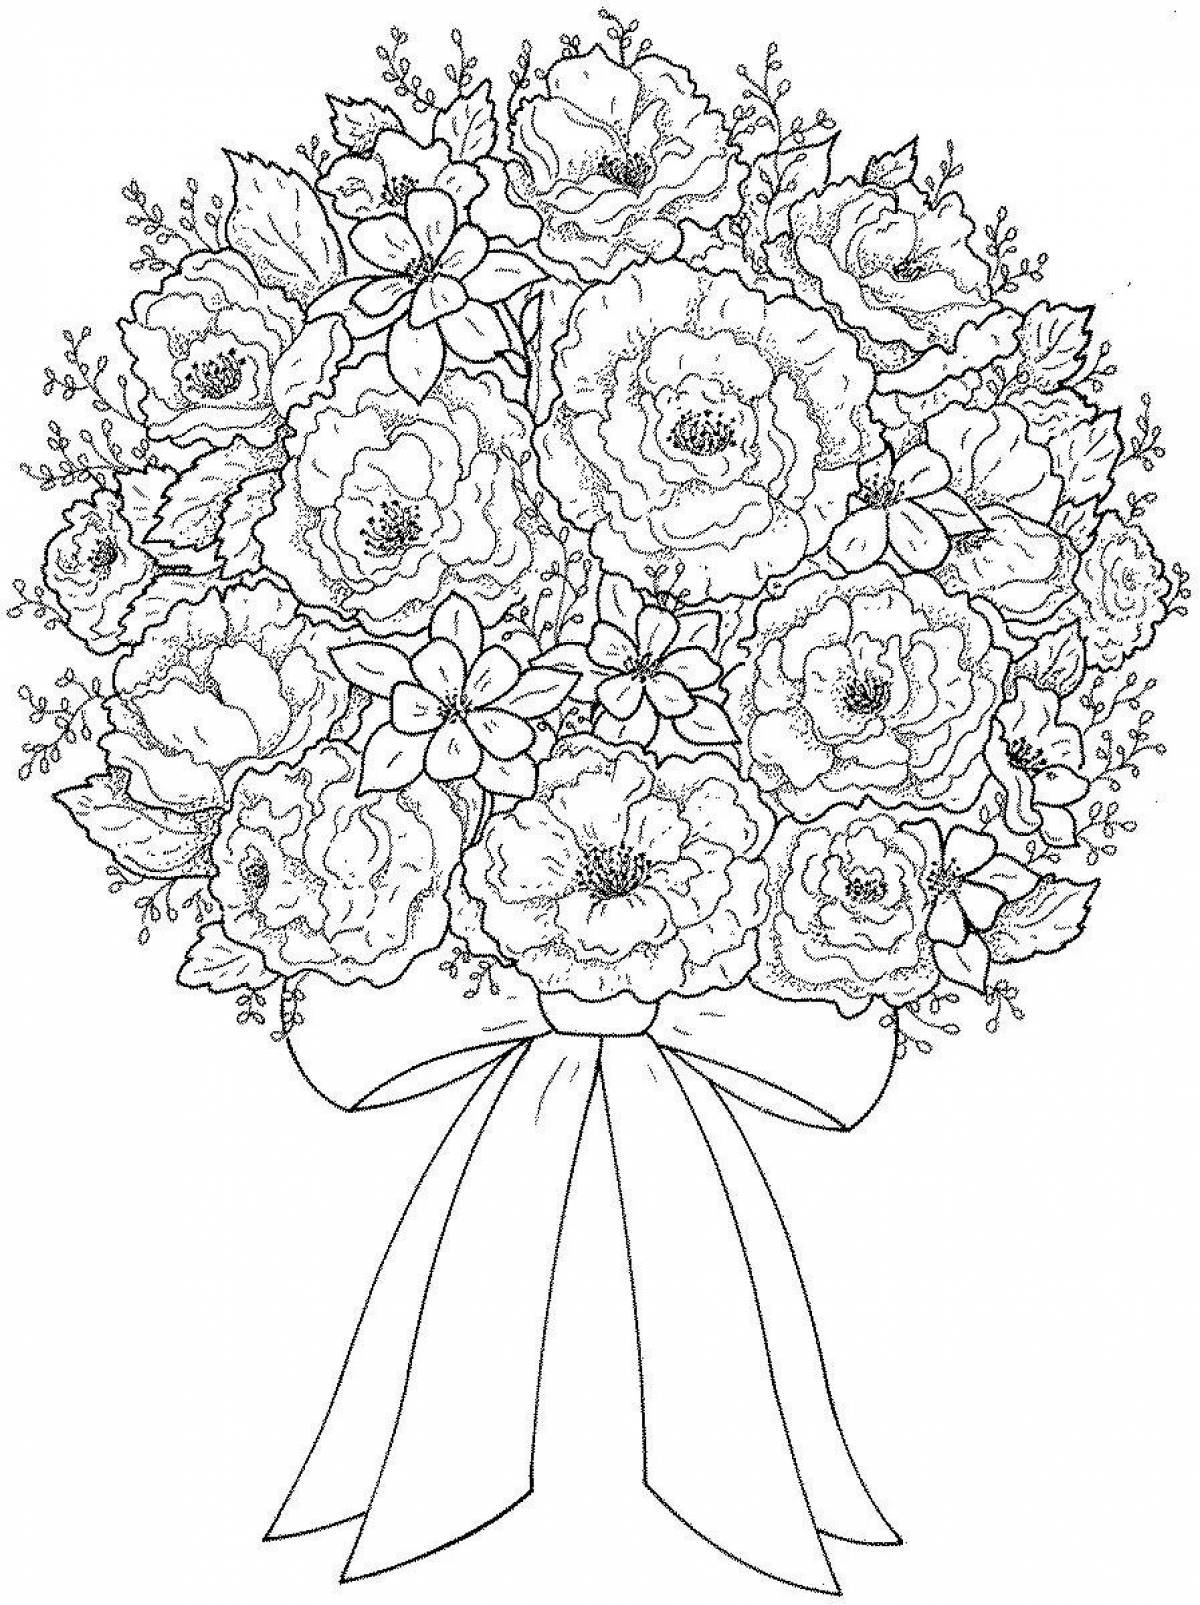 Showy bouquet coloring for mom